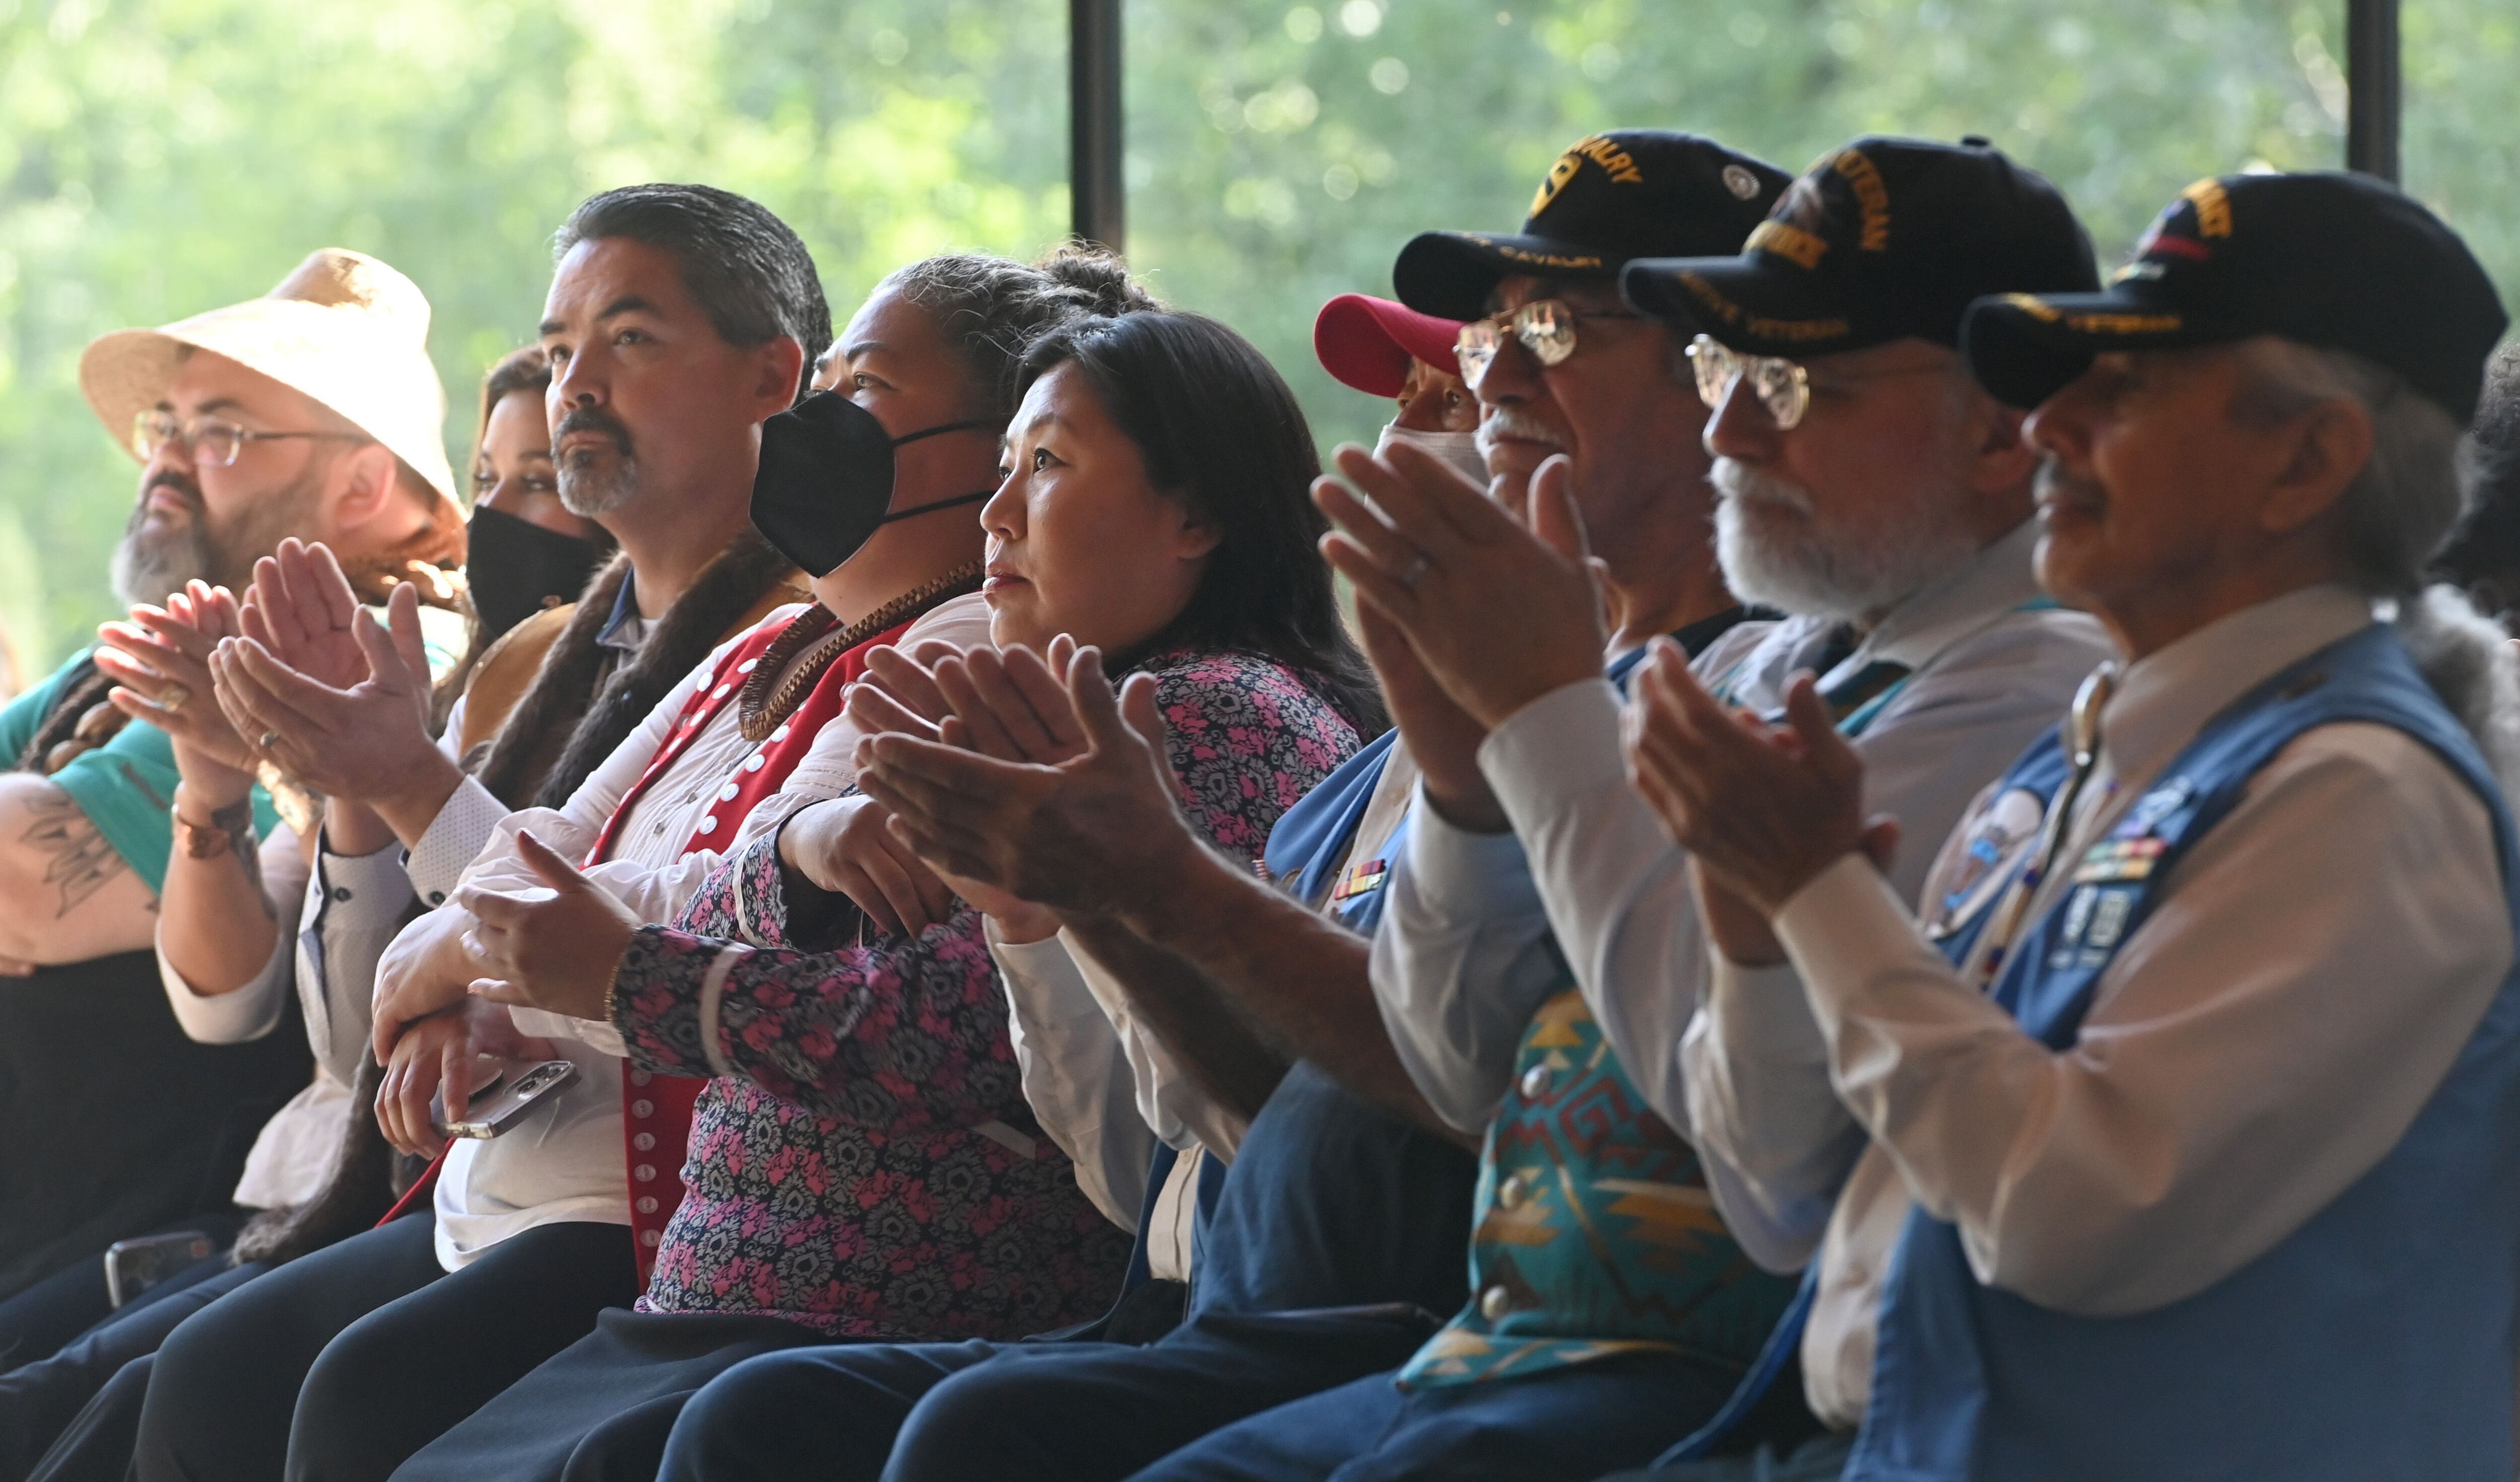 Native group's members reject bid to lessen state-recognized tribes' status  - Newsday